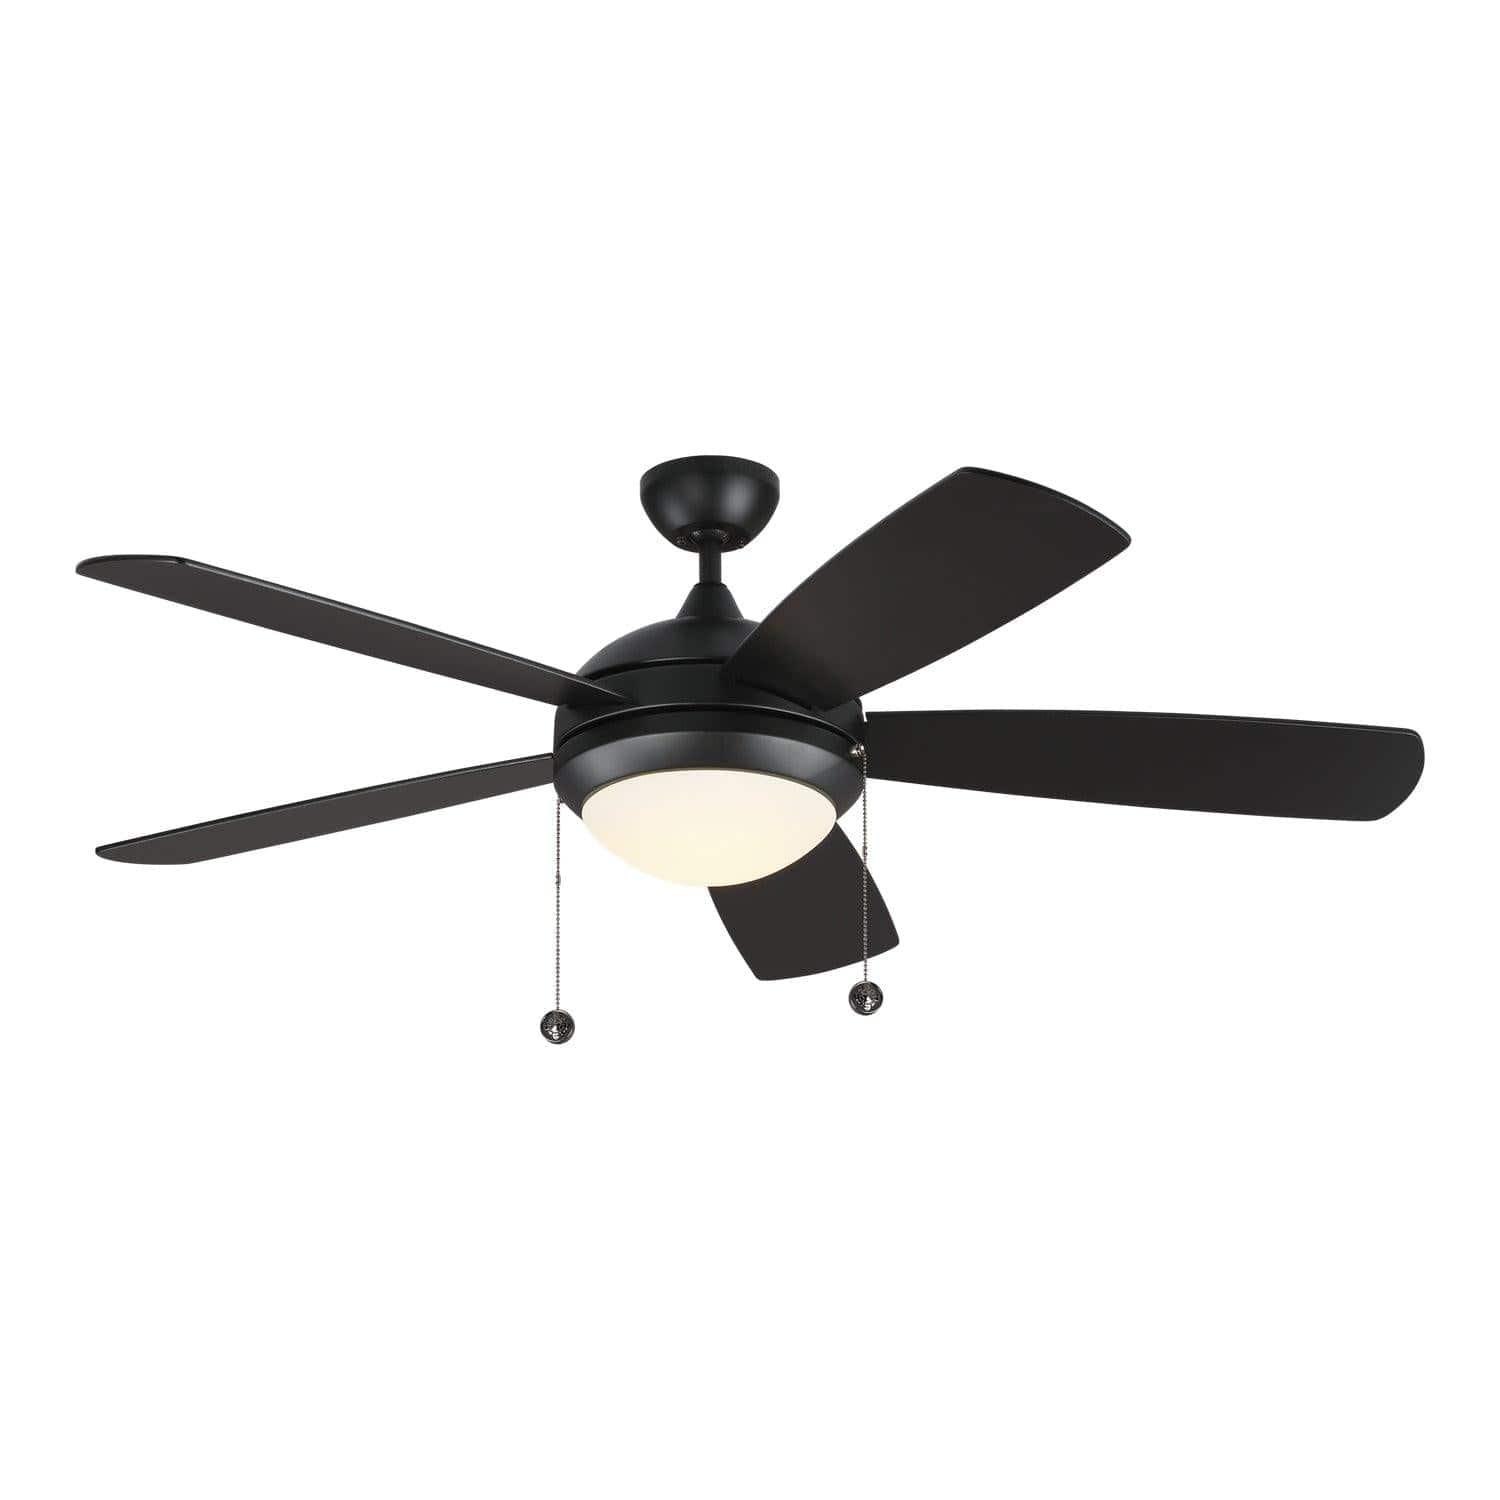 Visual Comfort Fan Collection - Discus Classic 52" Ceiling Fan - 5DIC52BKD-V1 | Montreal Lighting & Hardware